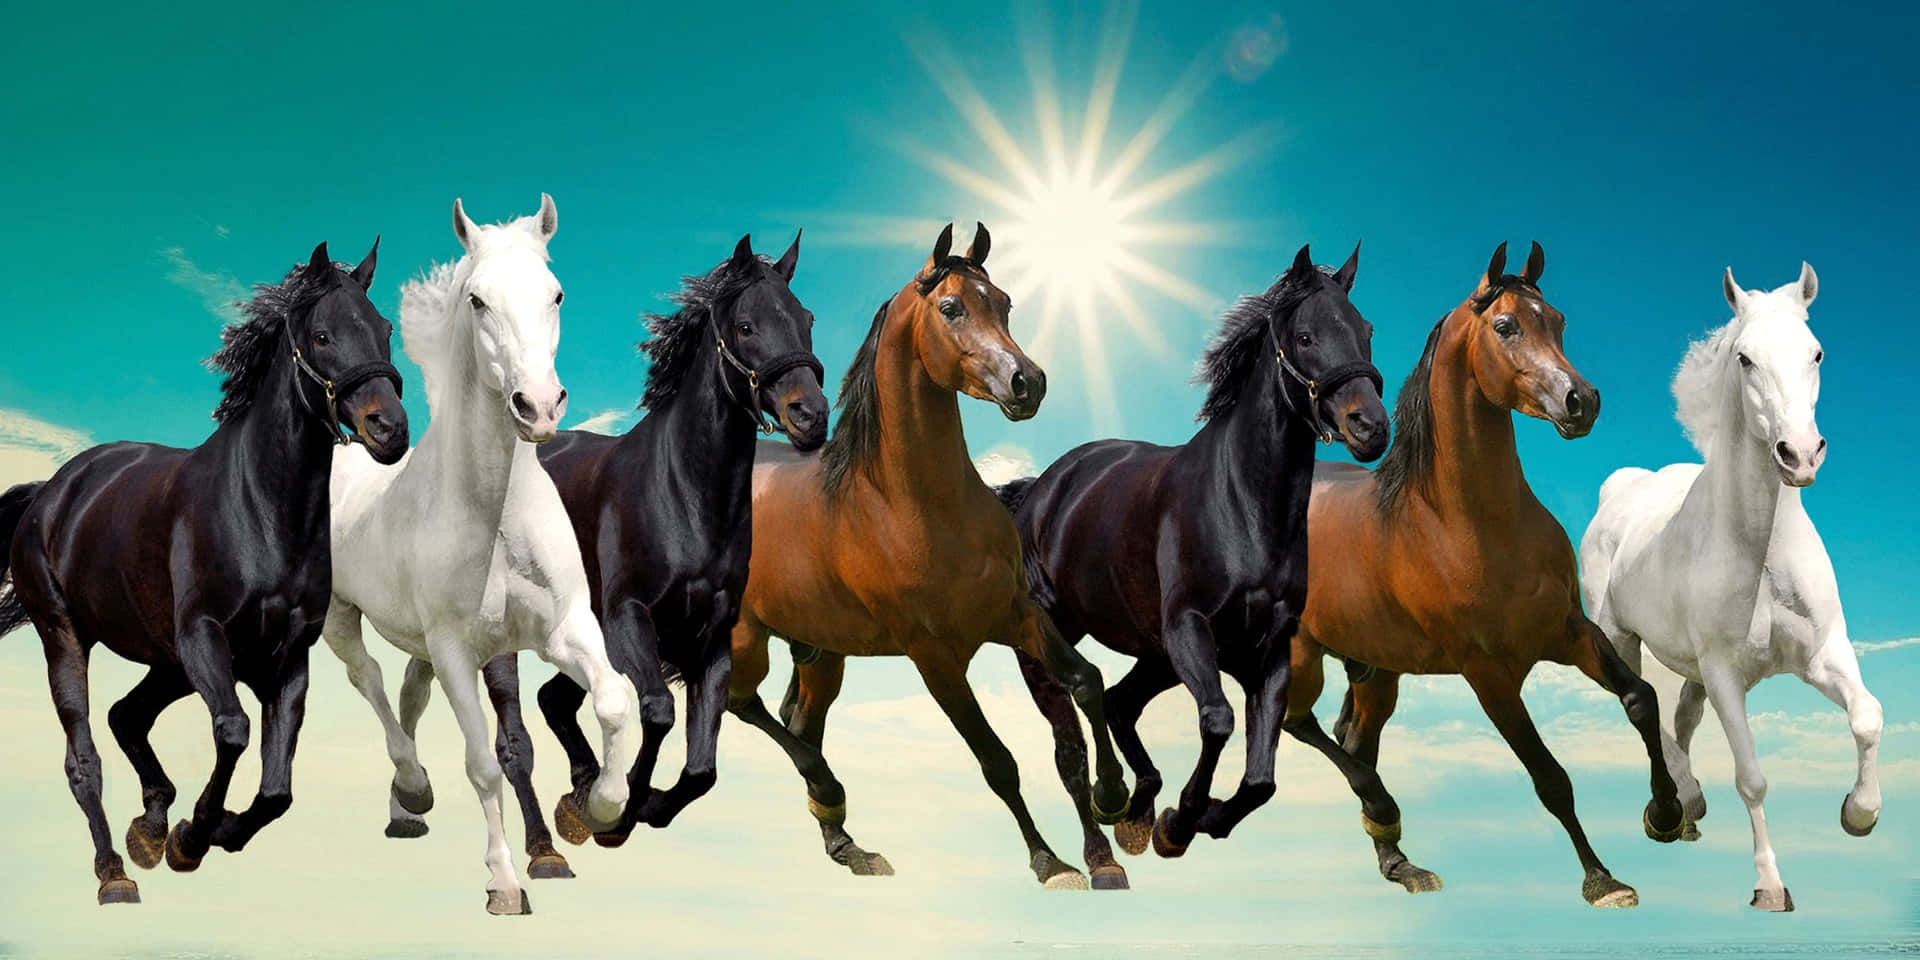 7 Horses In Brown, White, And Black Background